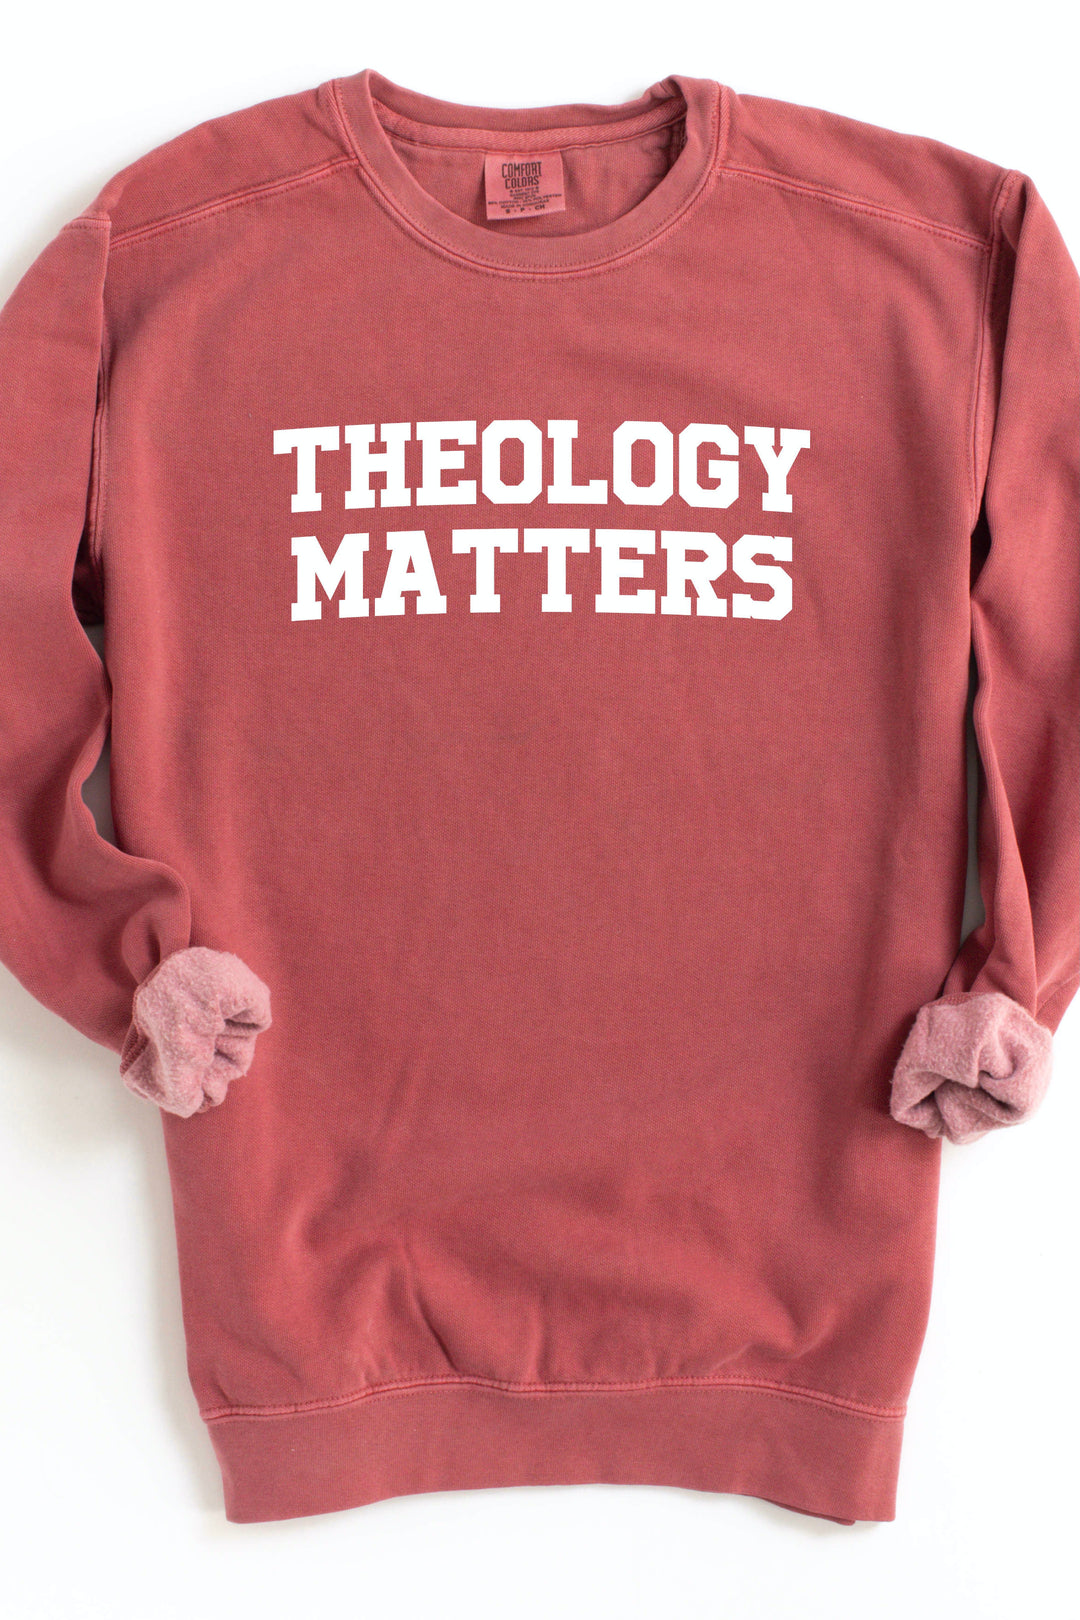 “Theology Matters” Crewneck Pullover